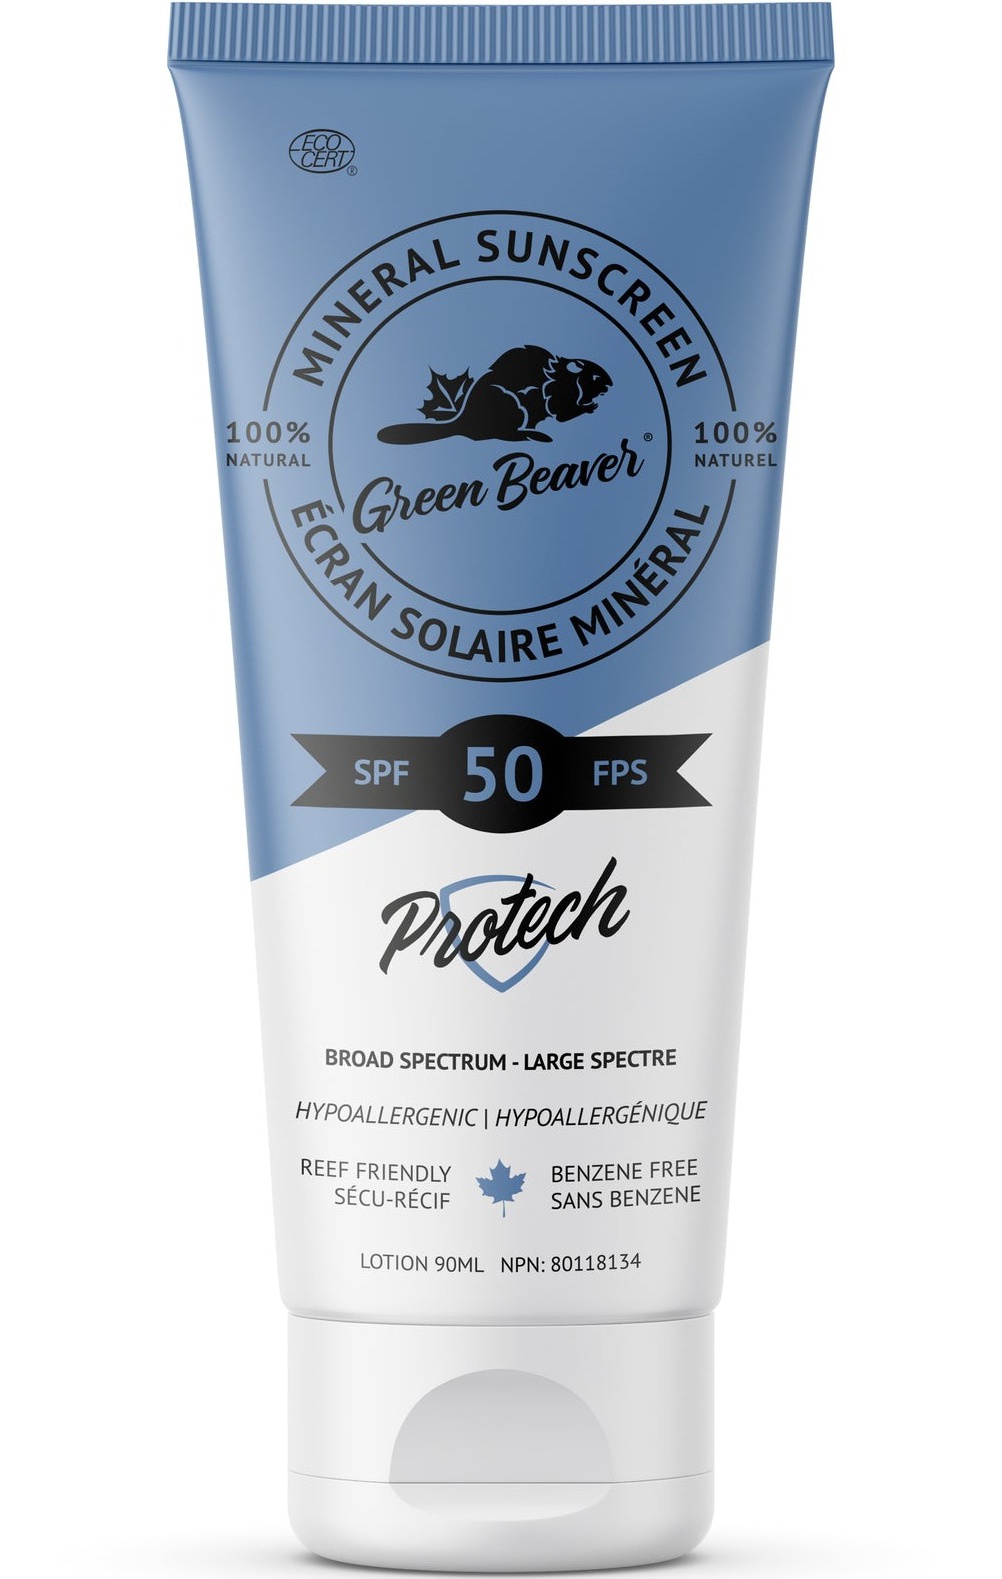 Green Beaver Adult Mineral Sunscreen Lotion SPF 50